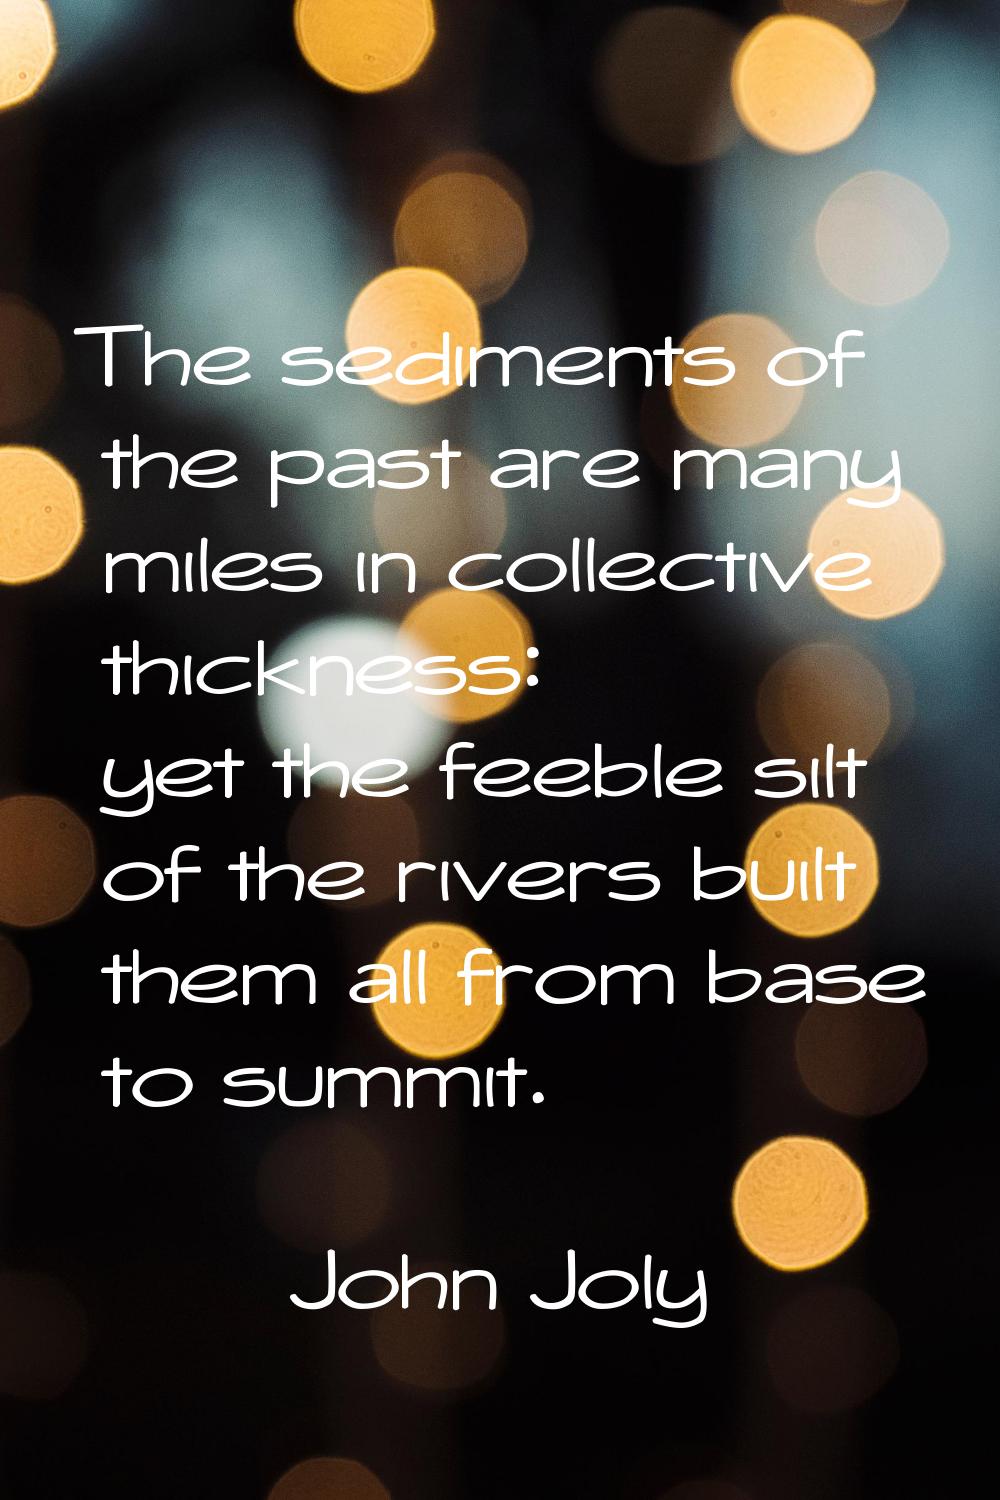 The sediments of the past are many miles in collective thickness: yet the feeble silt of the rivers